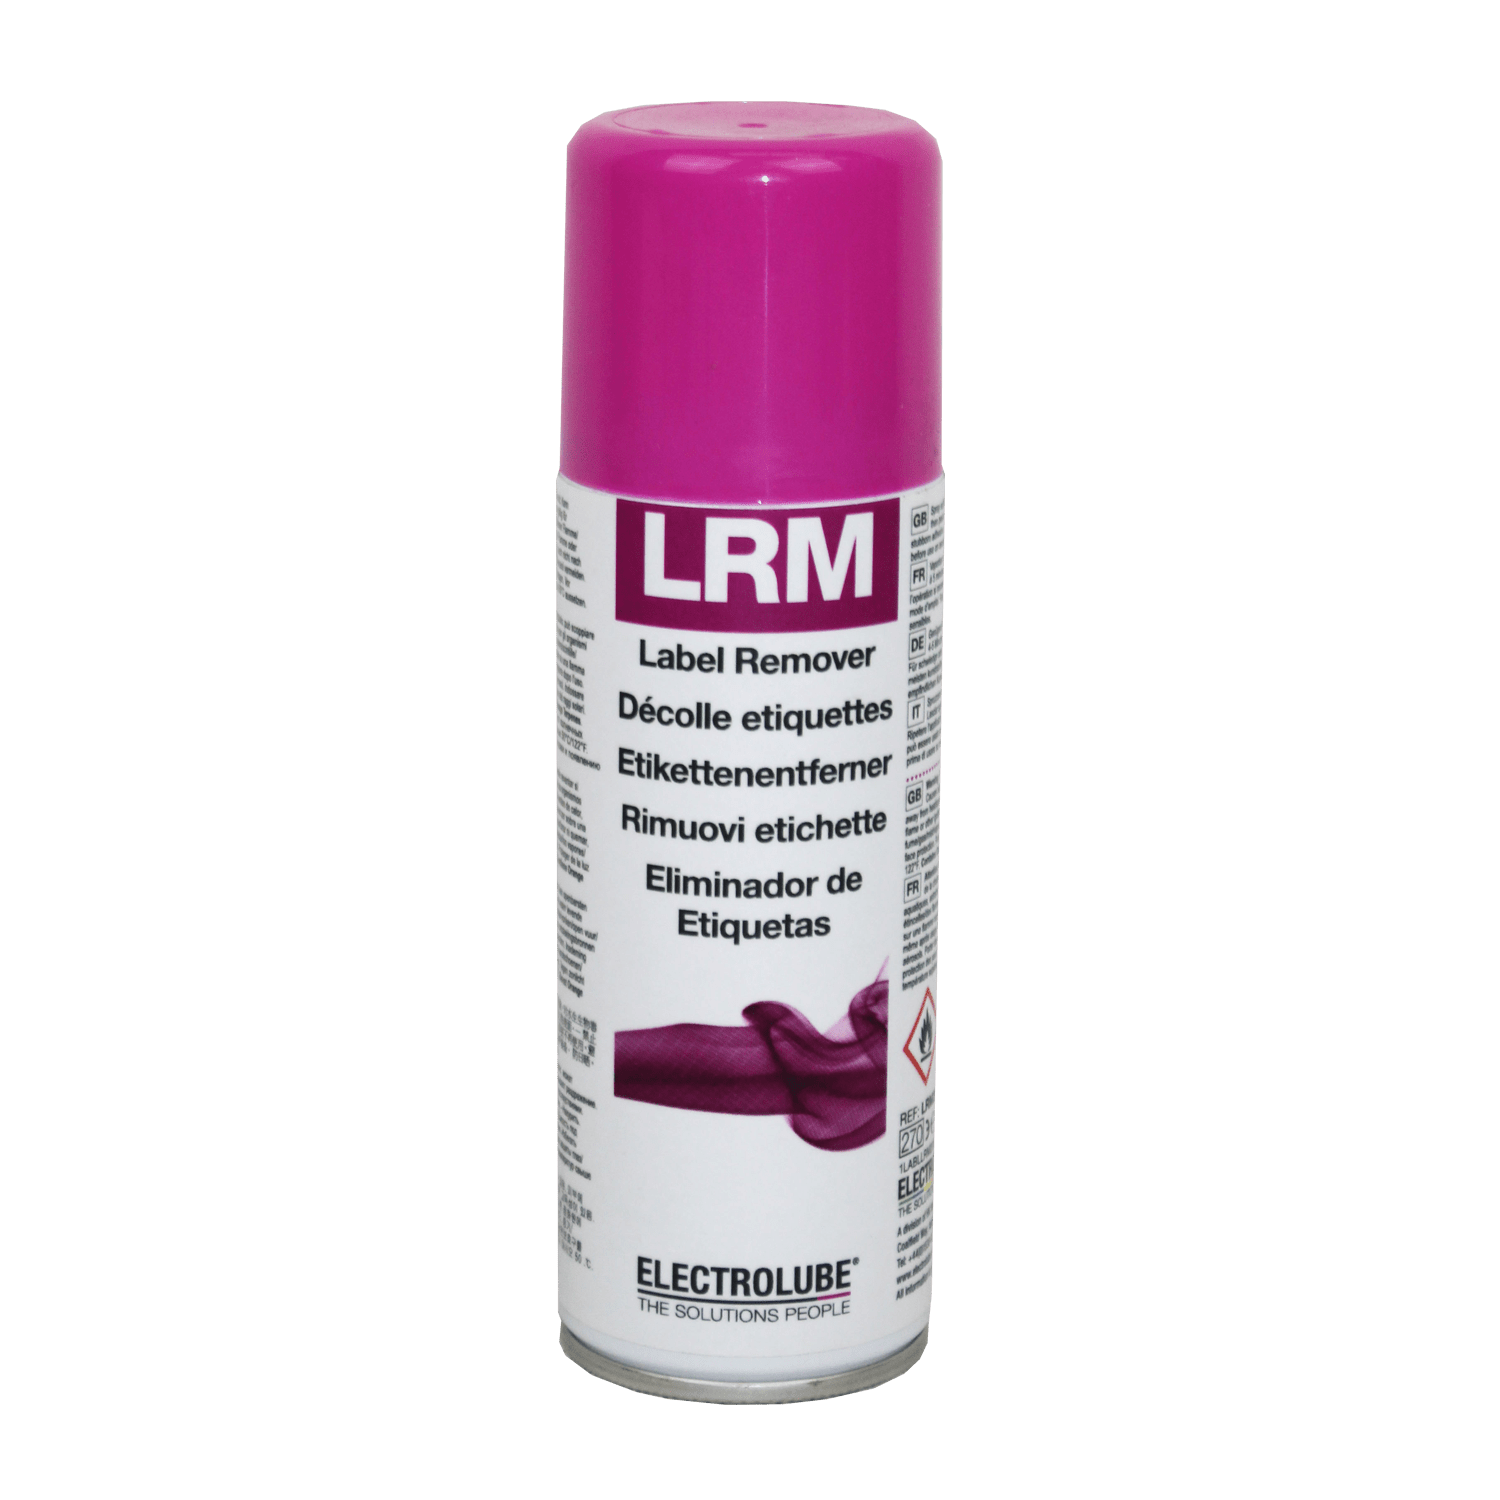 Label Remover, Cleaner, Electrolube Distributor